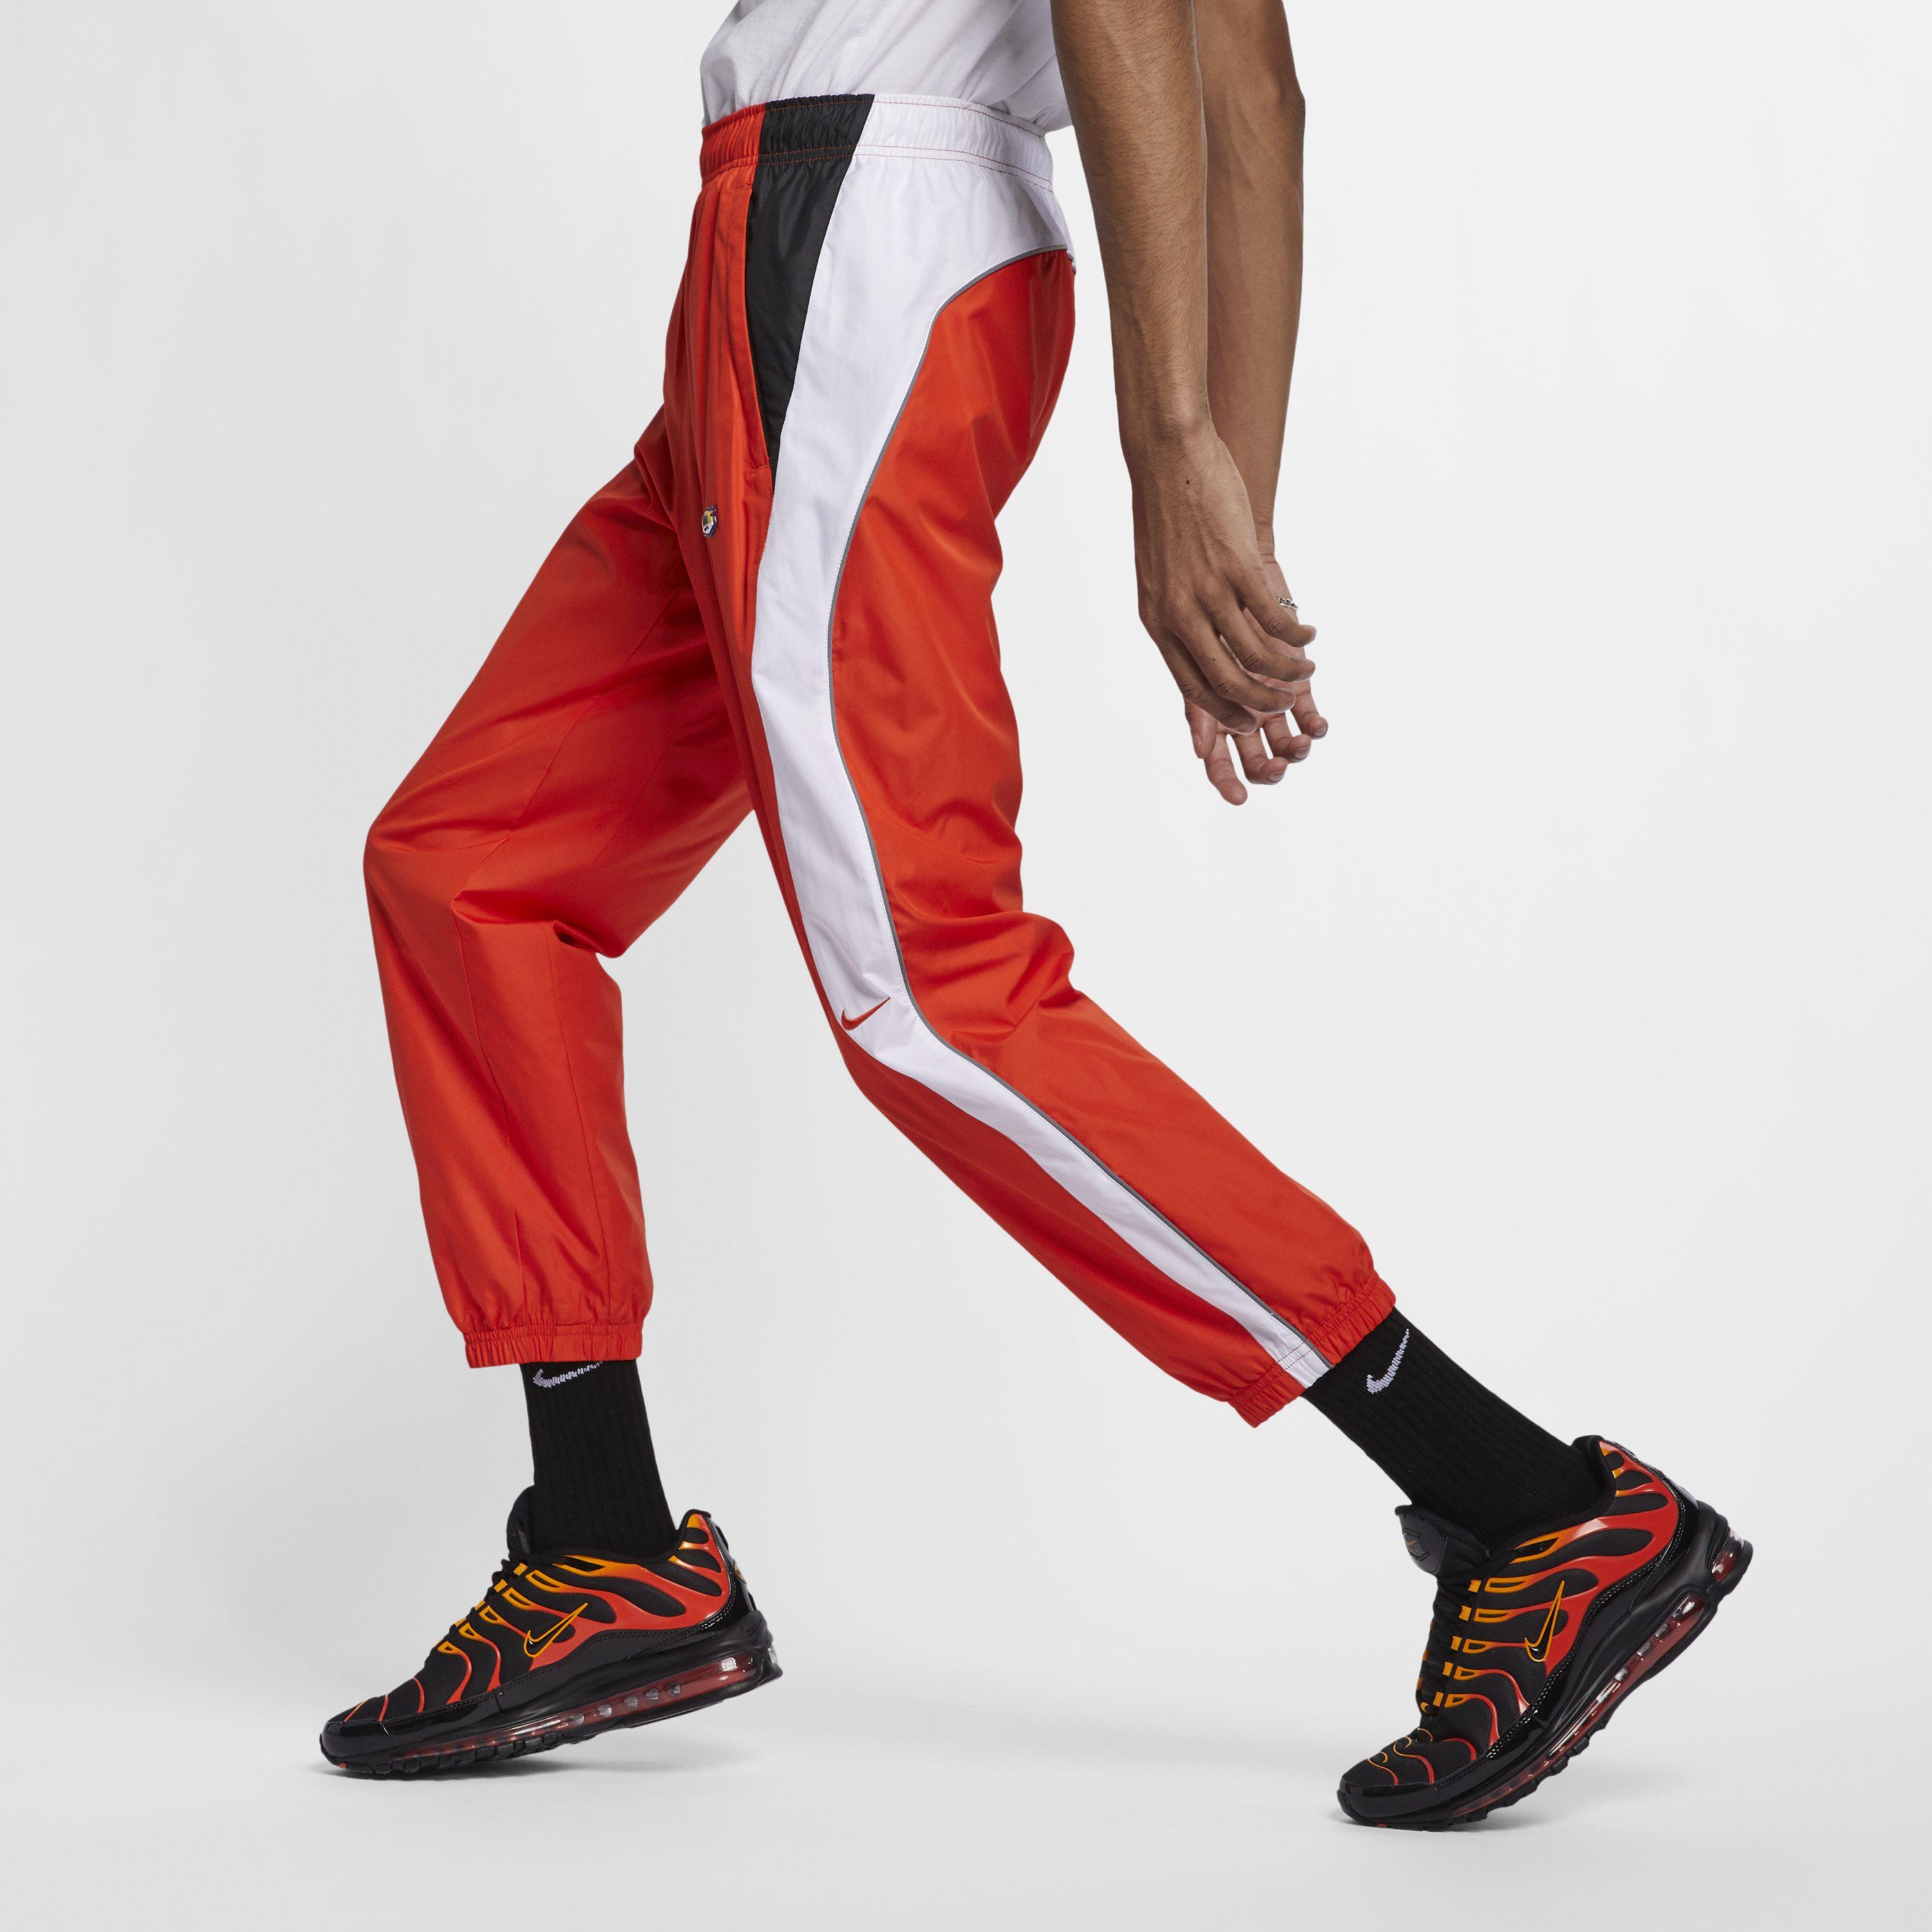 Nike Lab Collection Tn Tracksuit Bottoms in Orange for Men - Lyst